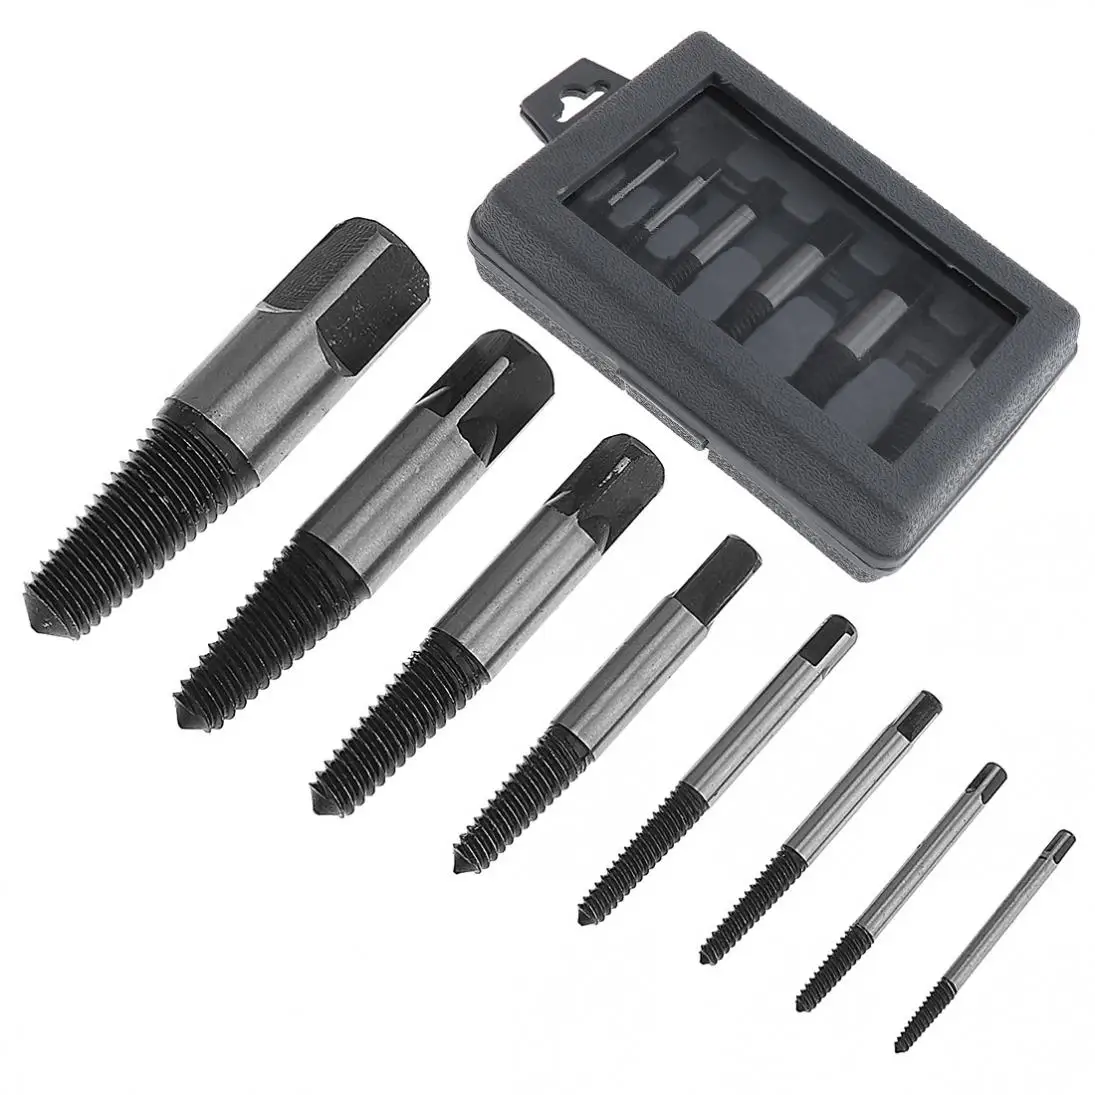 

8pcs/set Screw Extractor Easy Out Set Drill Bits Guide Broken Damaged Bolt Remover with Carbon Steel for Removing Tools